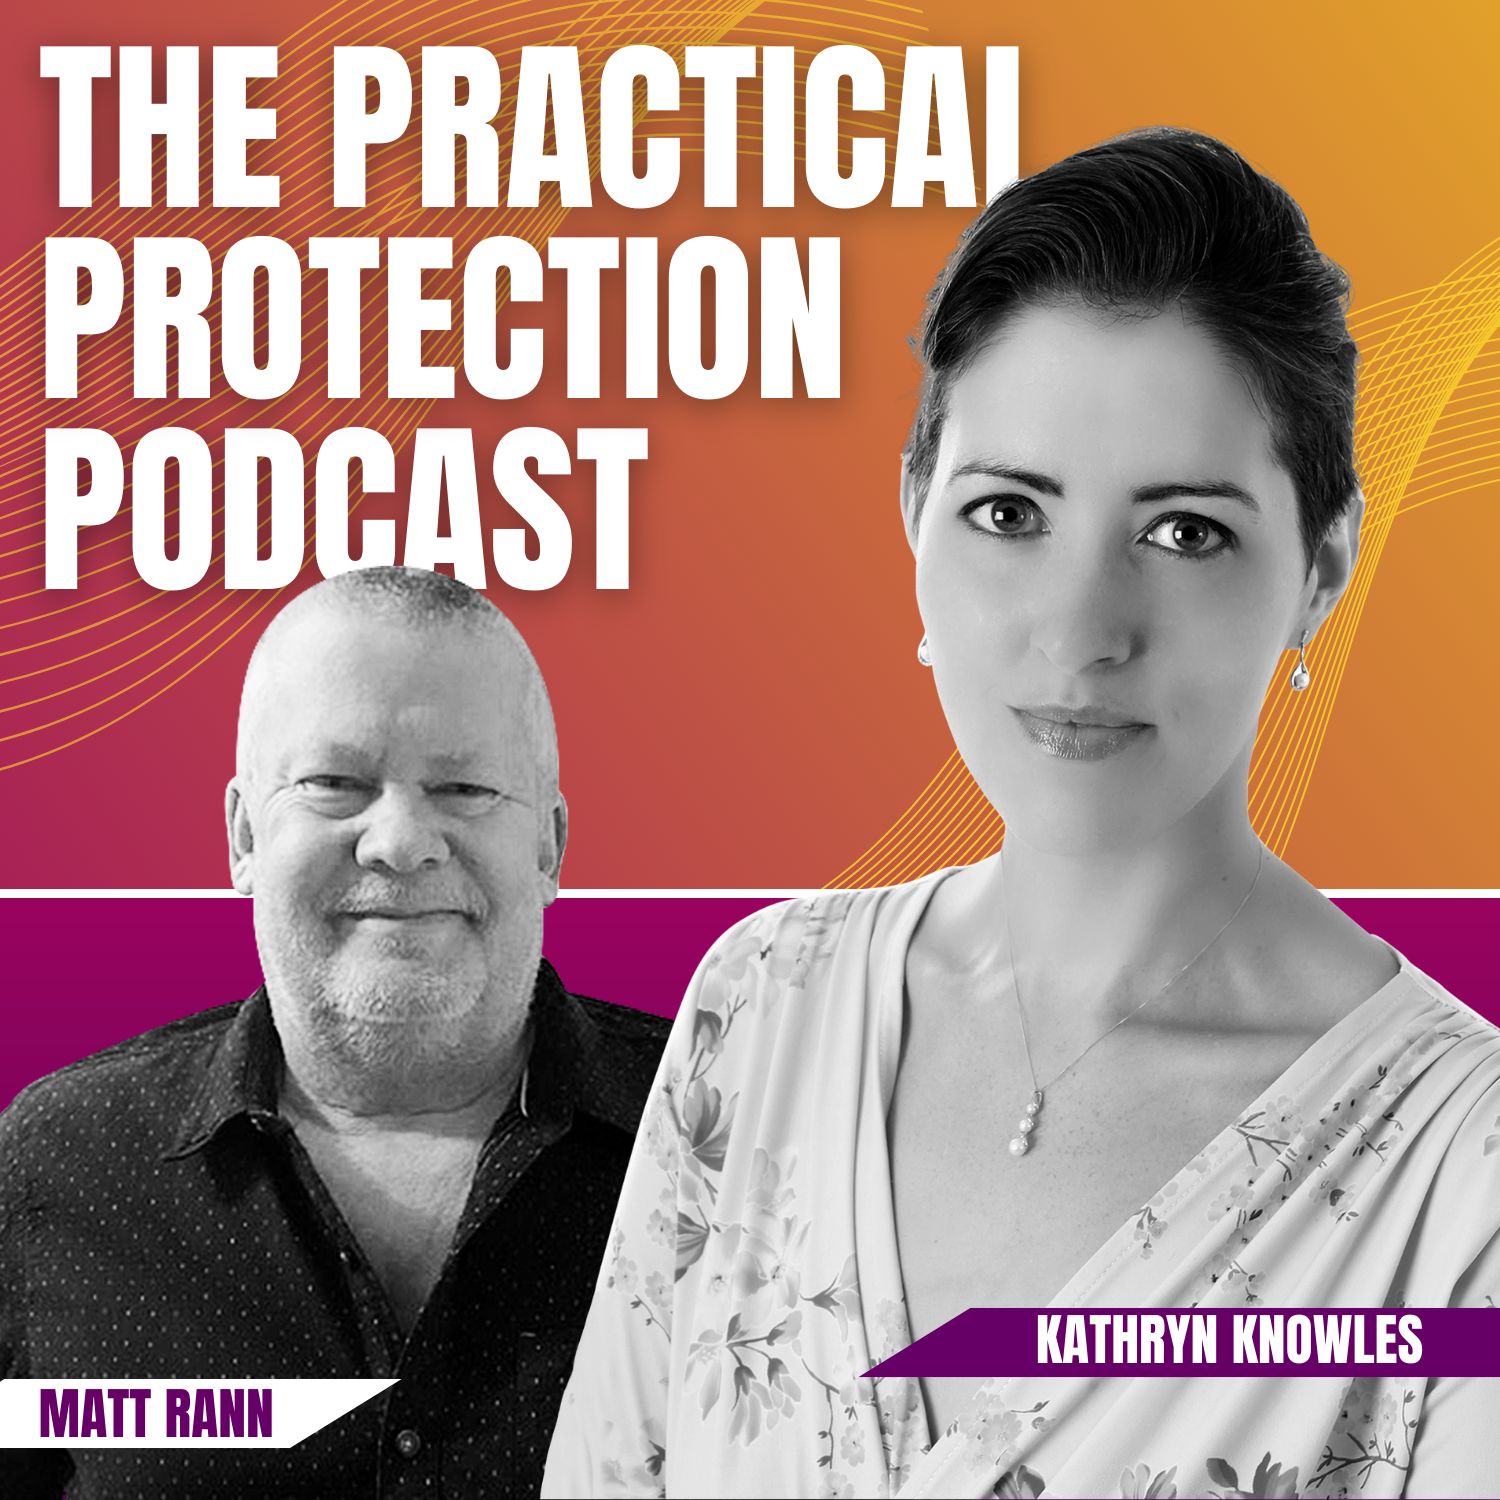 Artwork for The Practical Protection Podcast